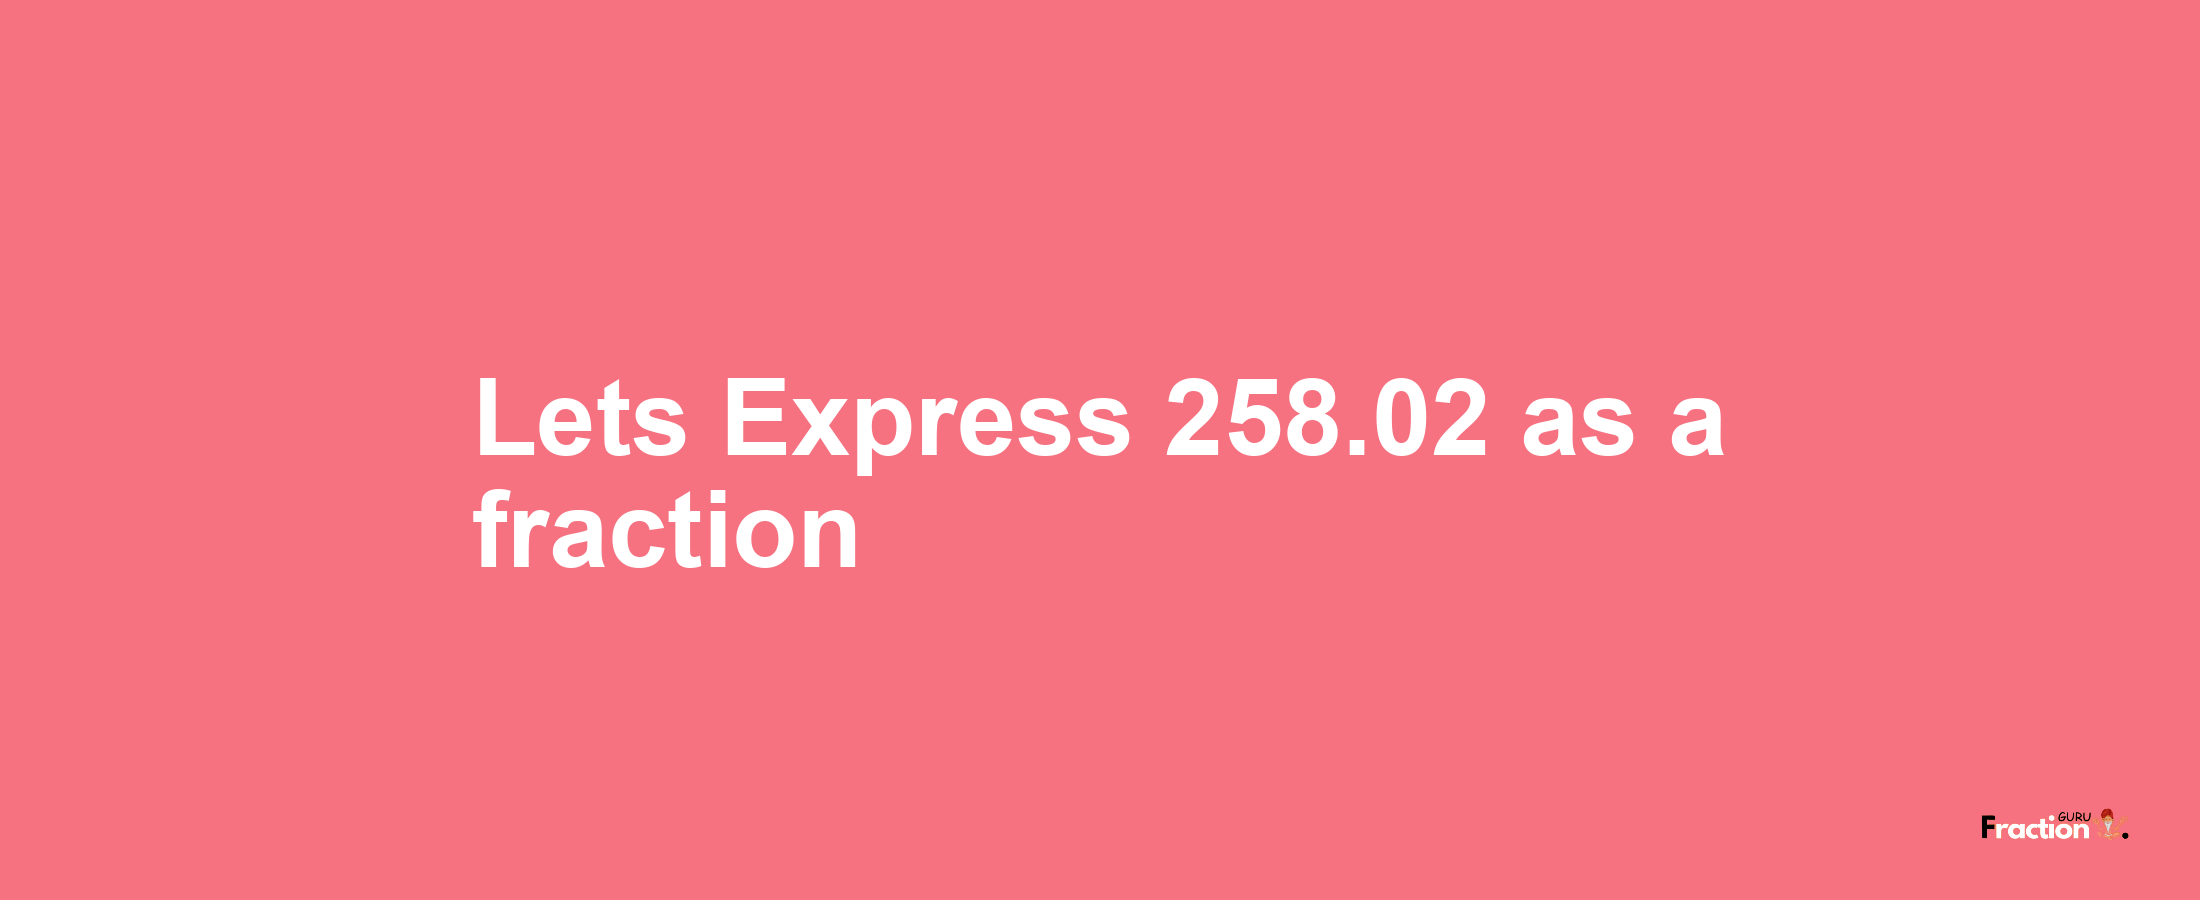 Lets Express 258.02 as afraction